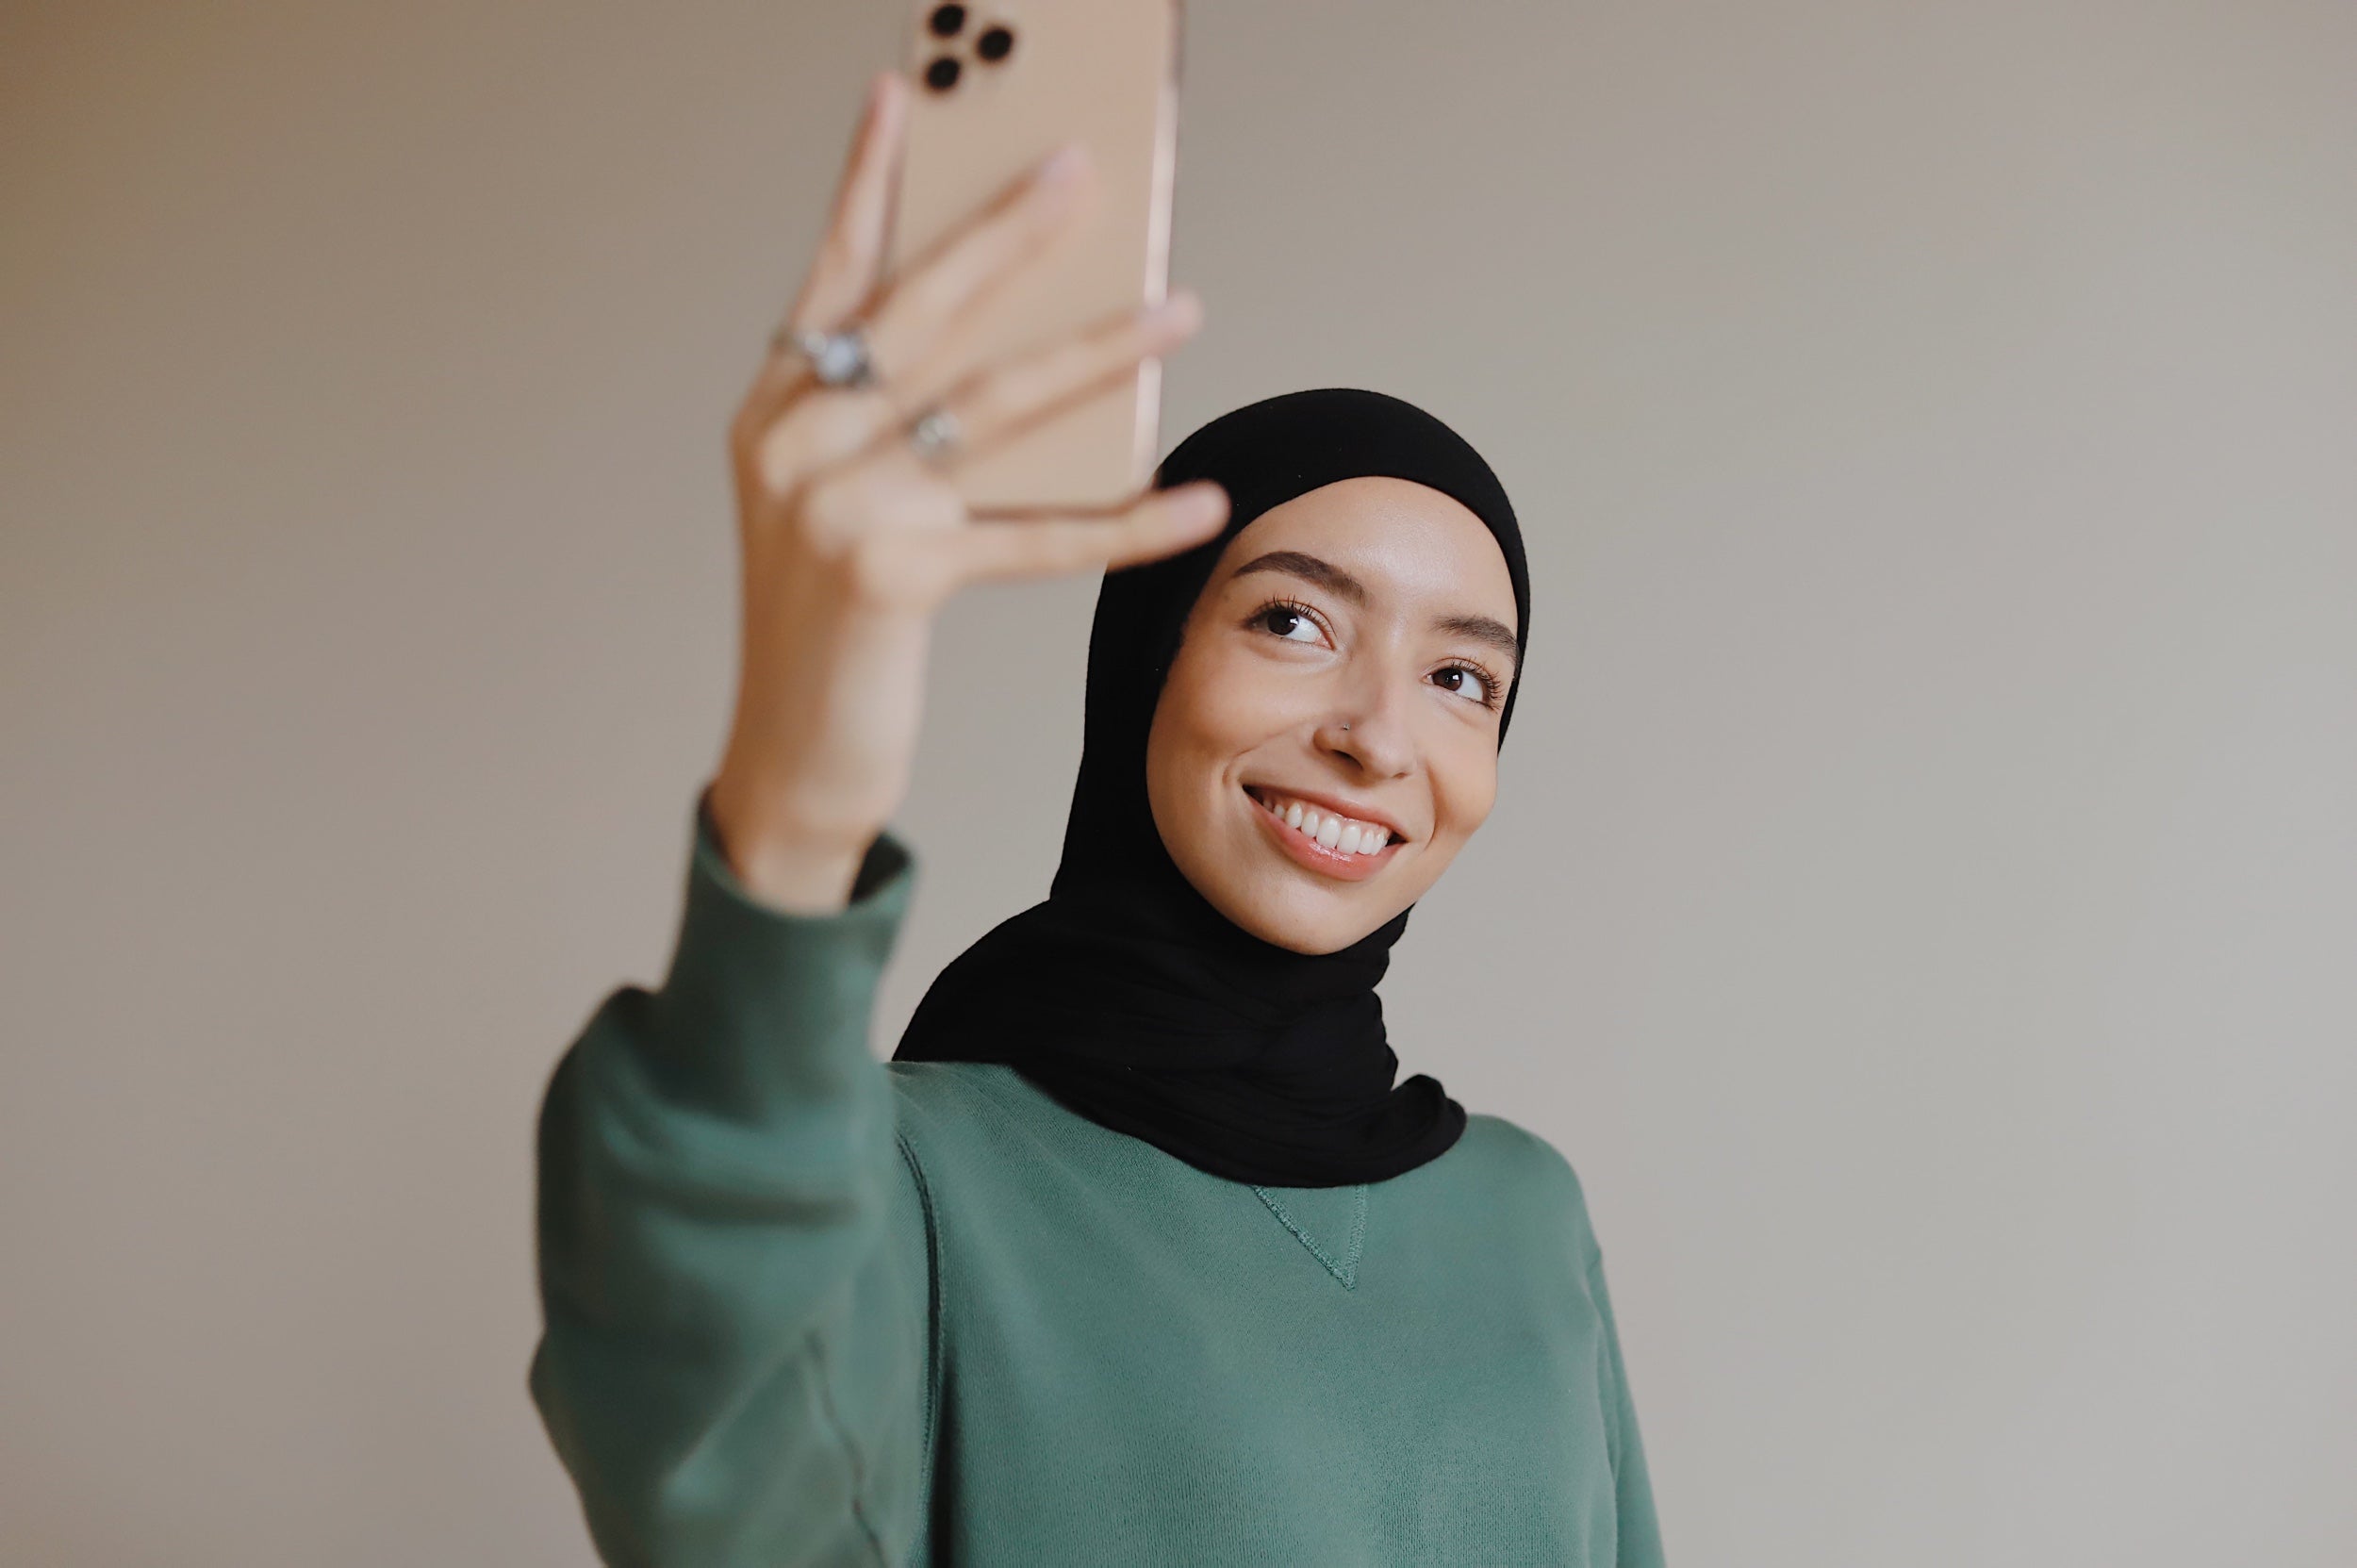 Portrait of a person wearing a hijab taking a selfie with a mobile phone